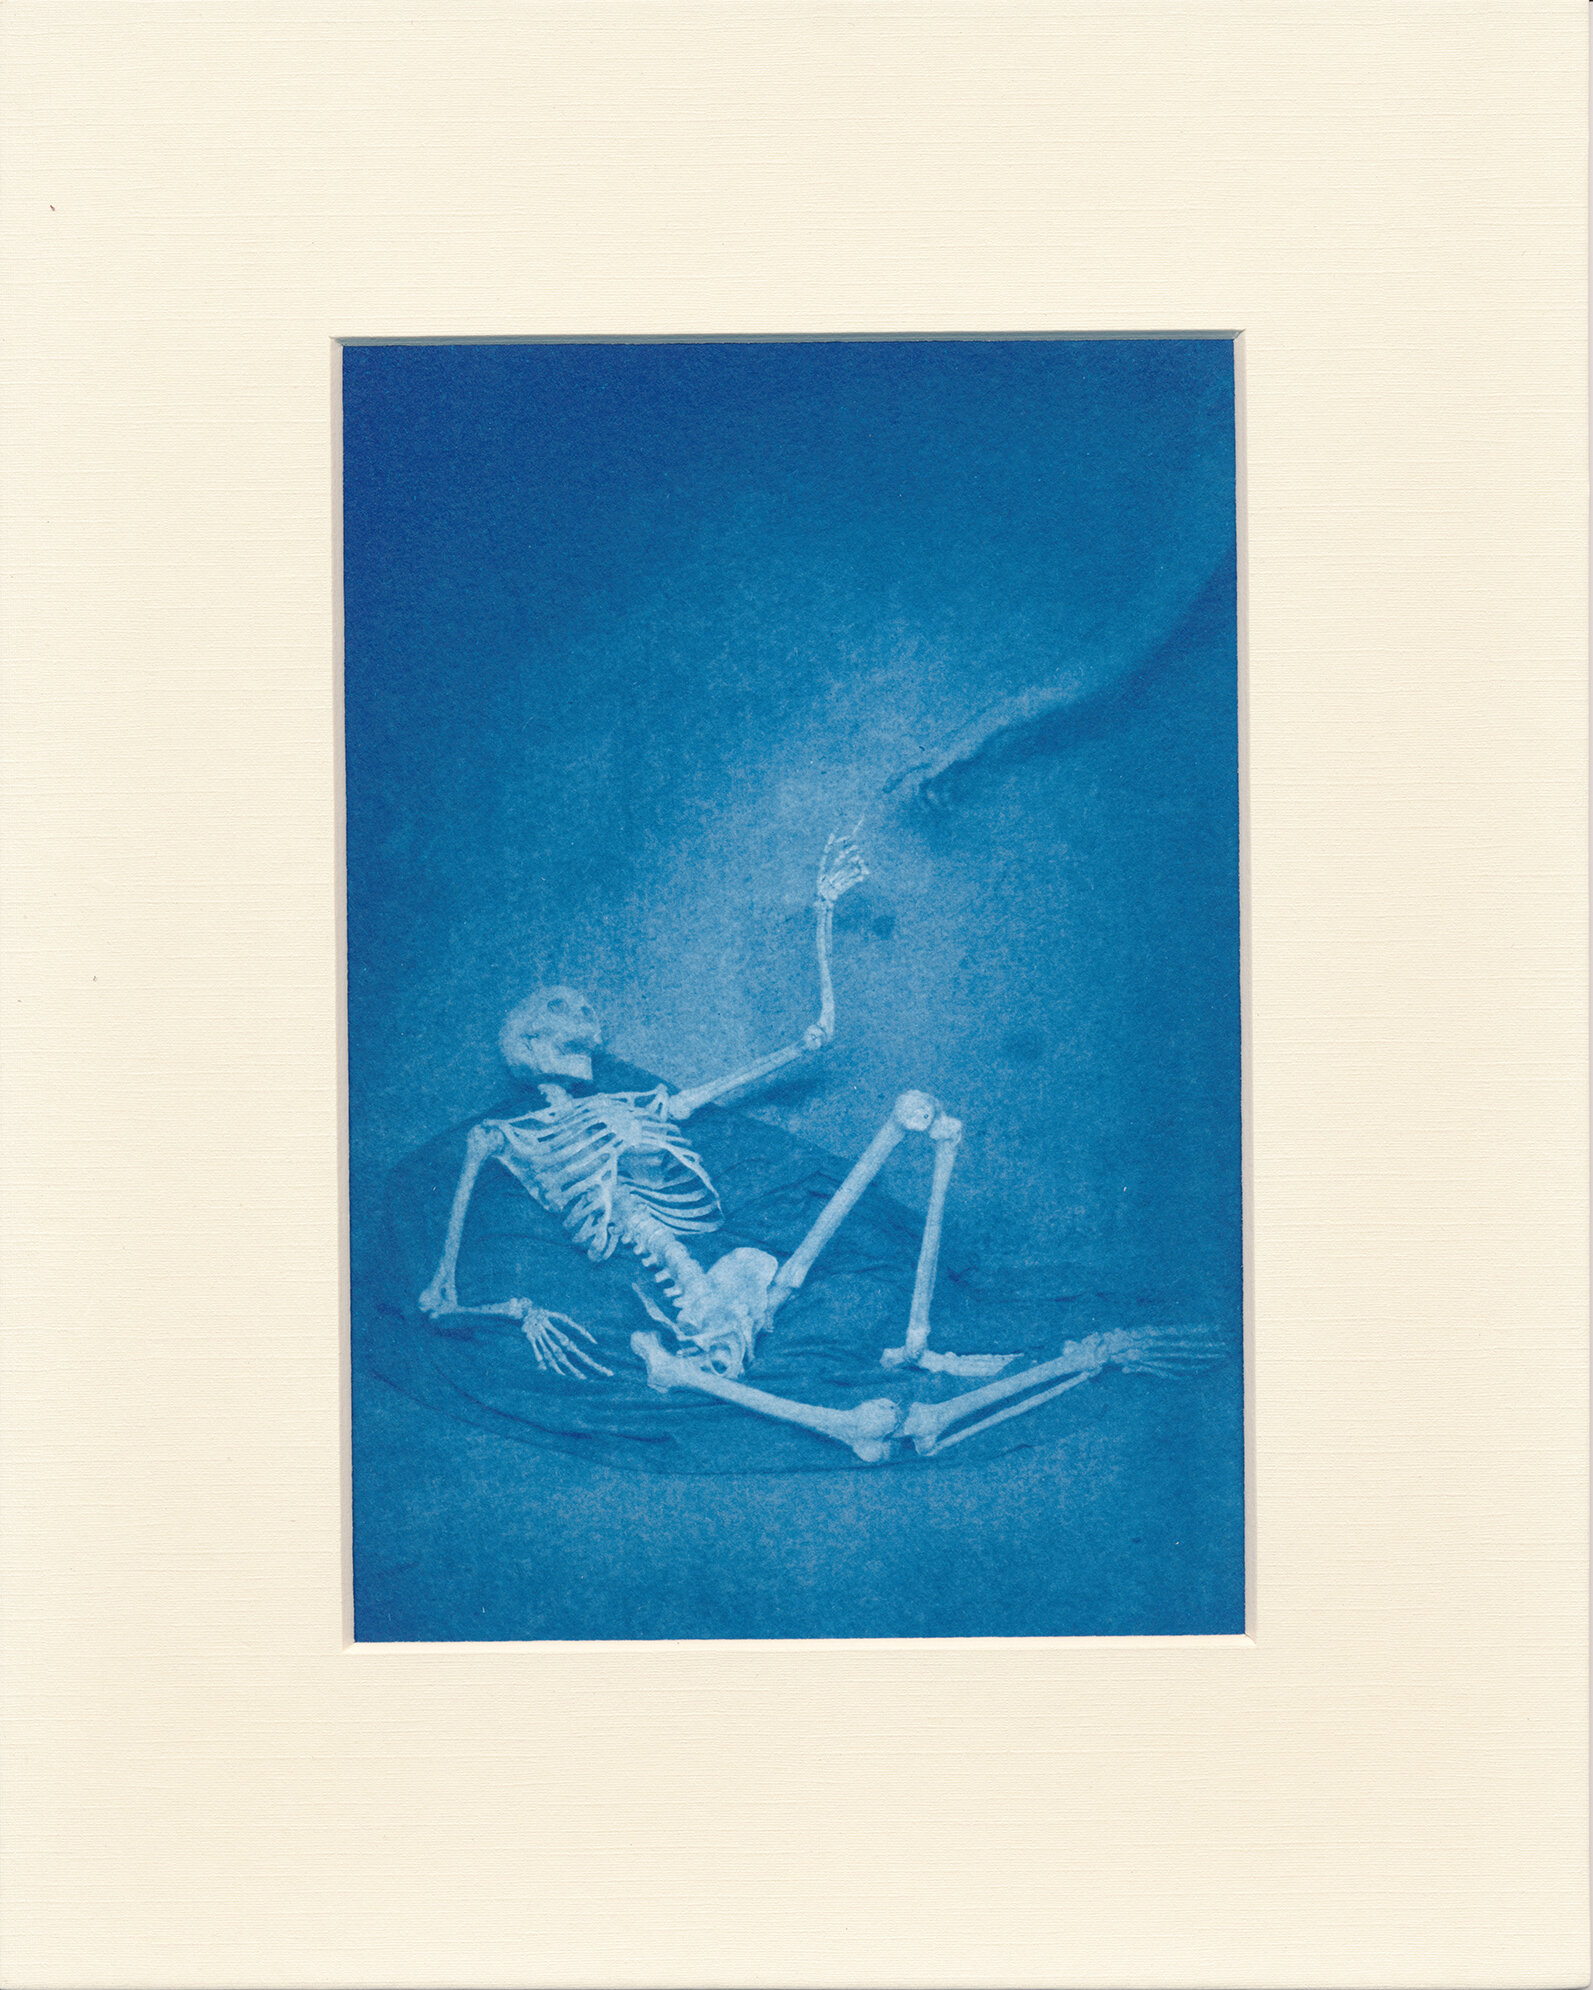  After the Creation of Adam  2015  Cyanotype  5x7 